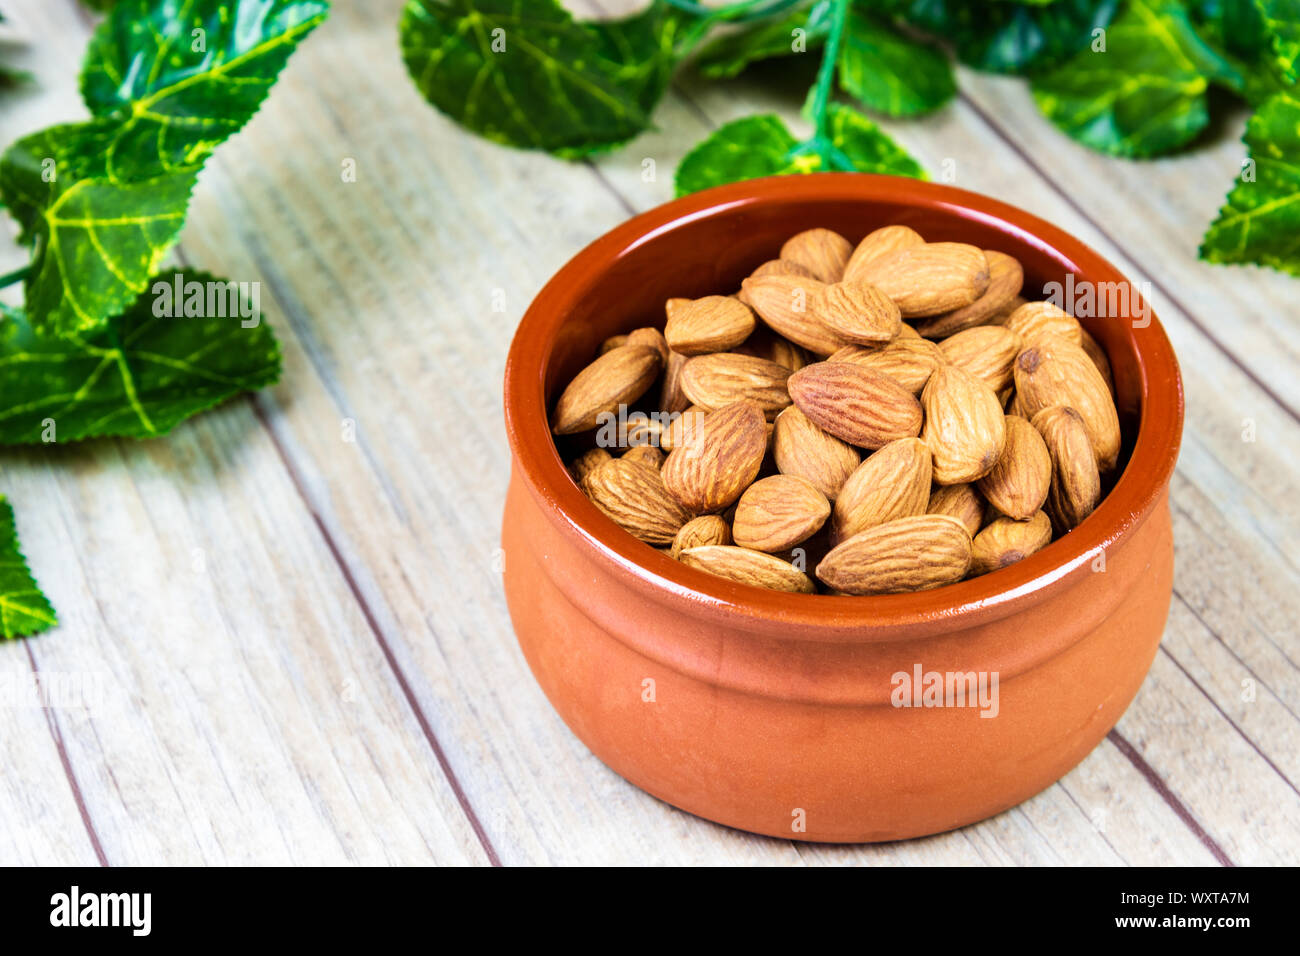 Almonds in a Bowl on a Wooden Background Stock Photo